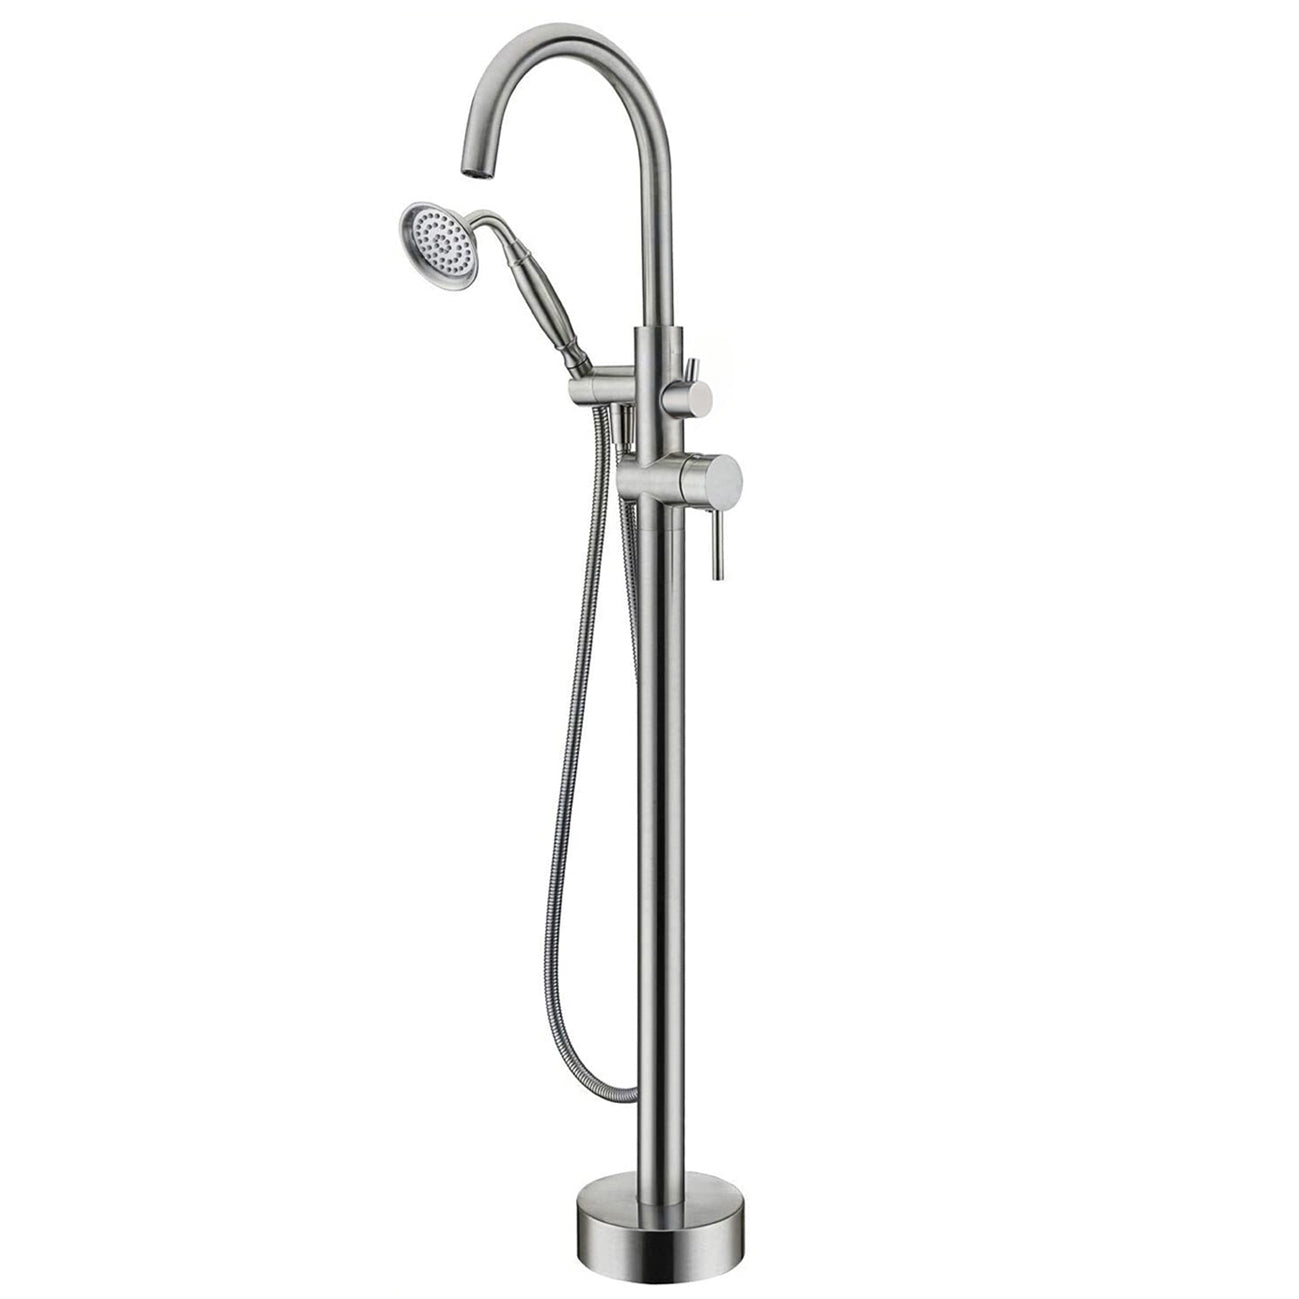 Boyel Living 6 GPM Floor Mount Freestanding Tub Faucet with Handheld Shower in Brushed Nickel